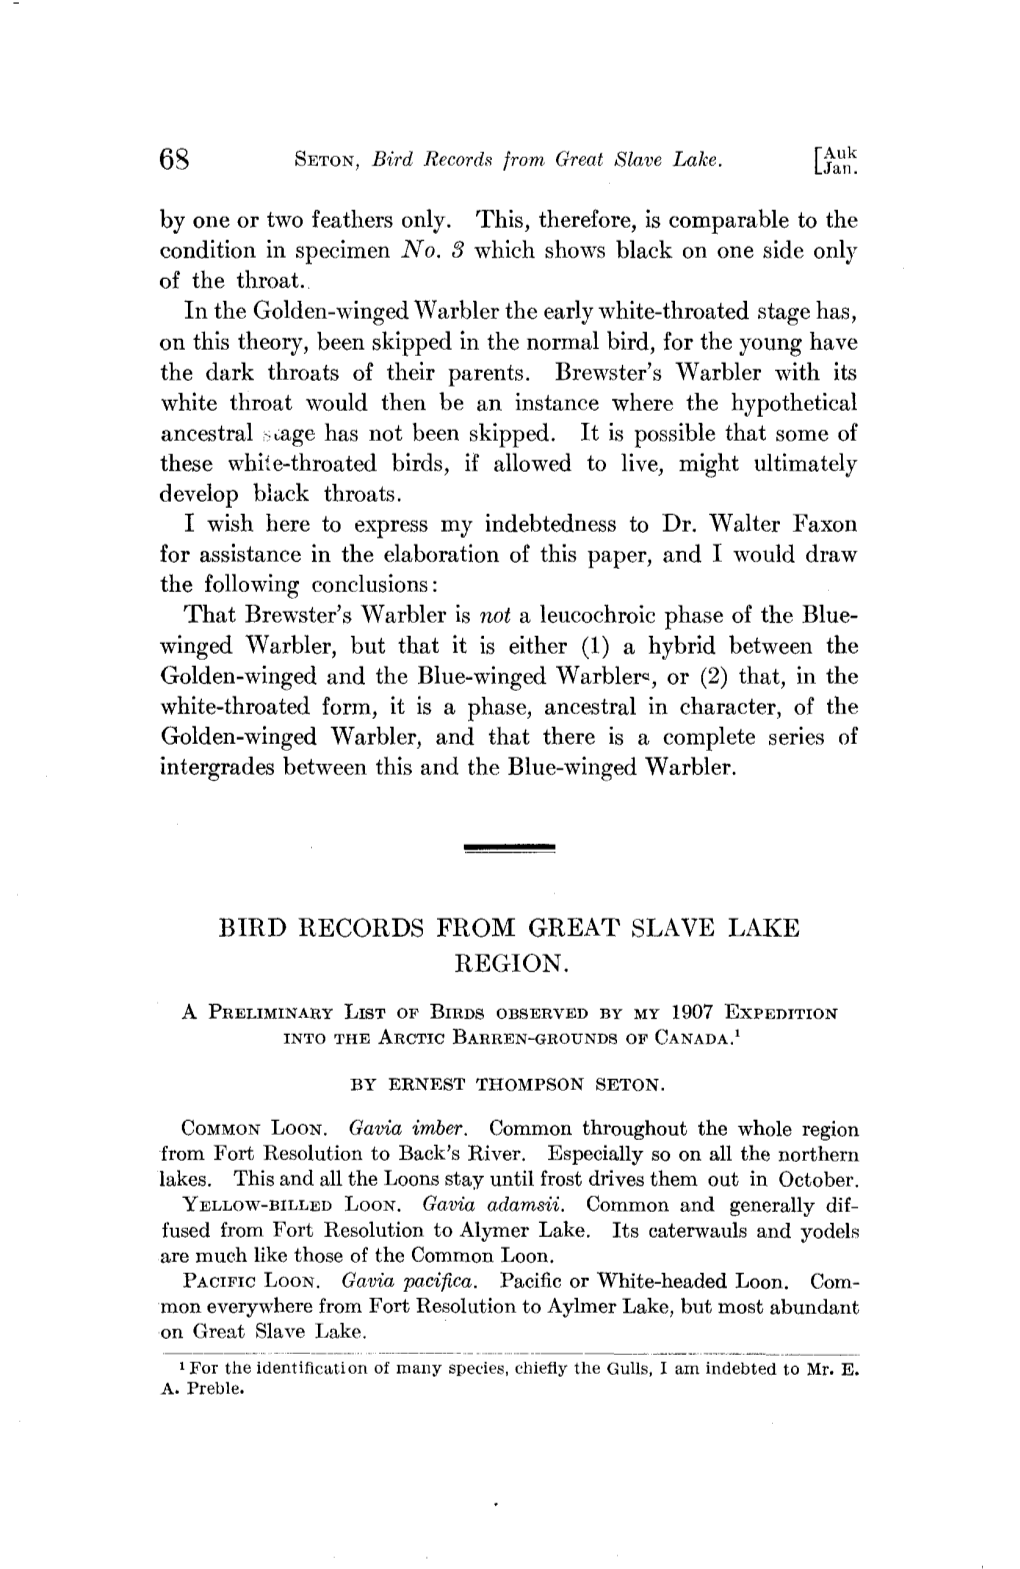 Bird Records from Great Slave Lake Region